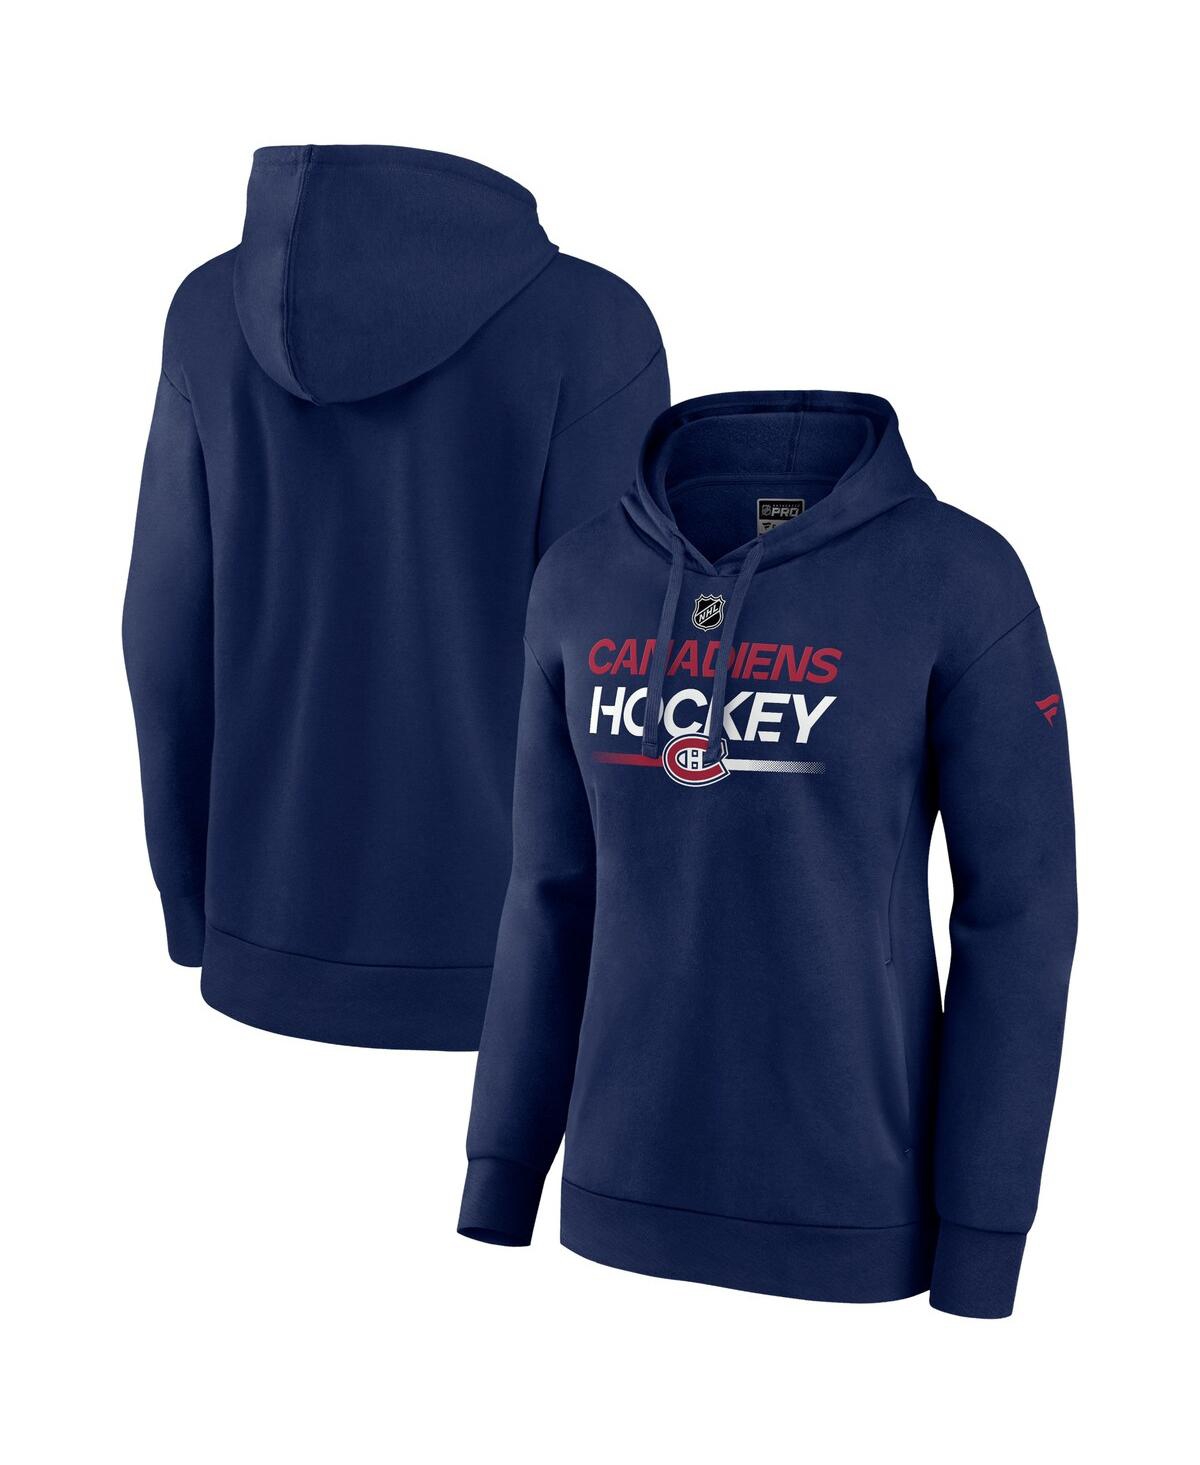 Fanatics Women's  Navy Montreal Canadiens Authentic Pro Pullover Hoodie